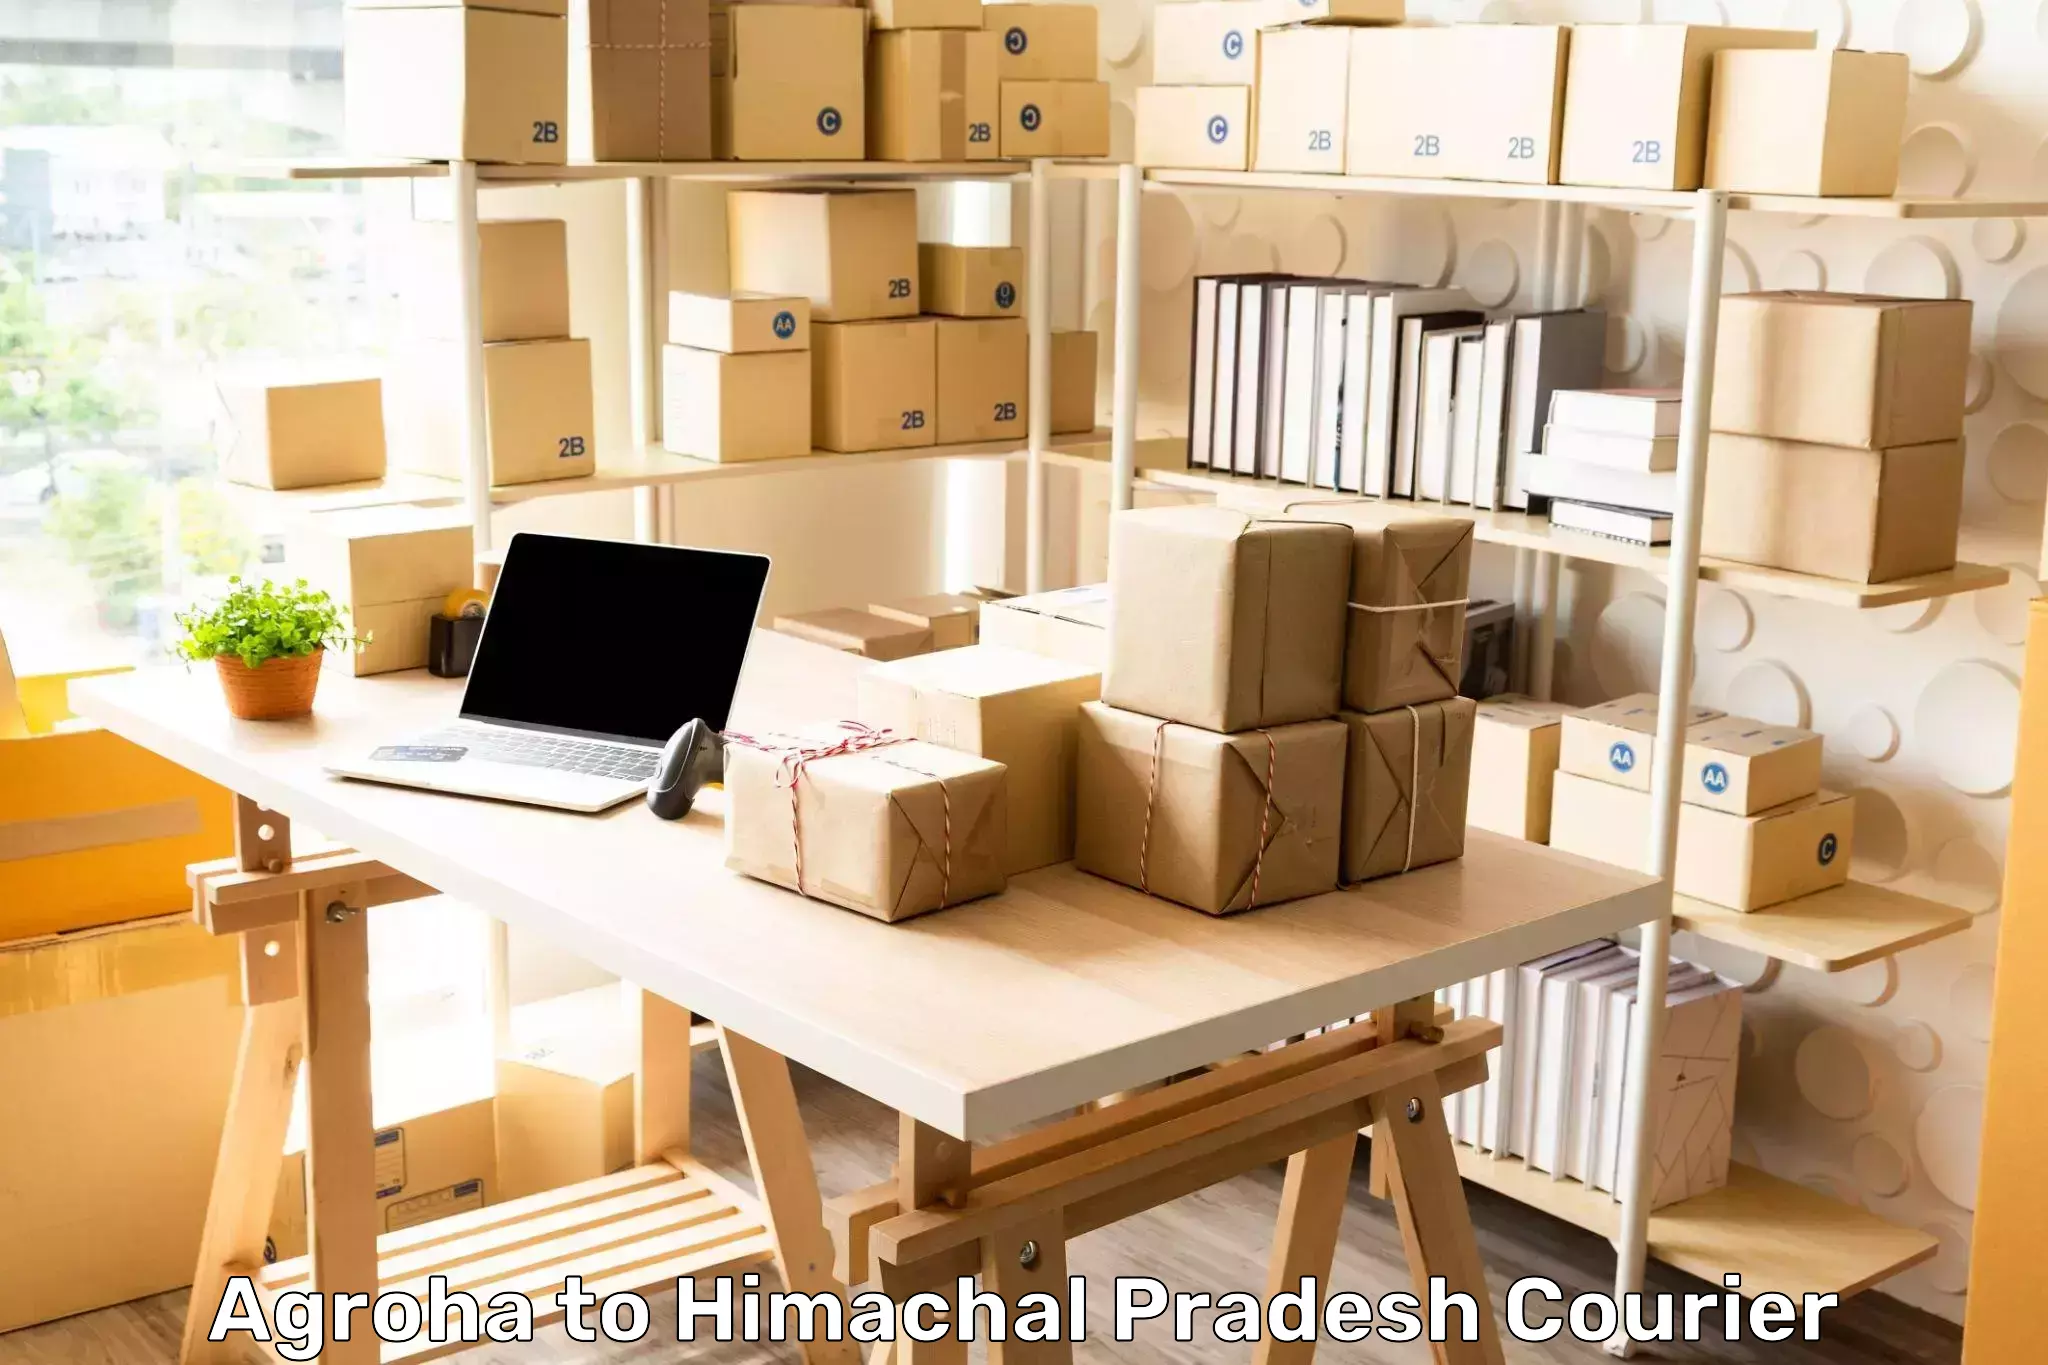 Parcel service for businesses Agroha to Himachal Pradesh